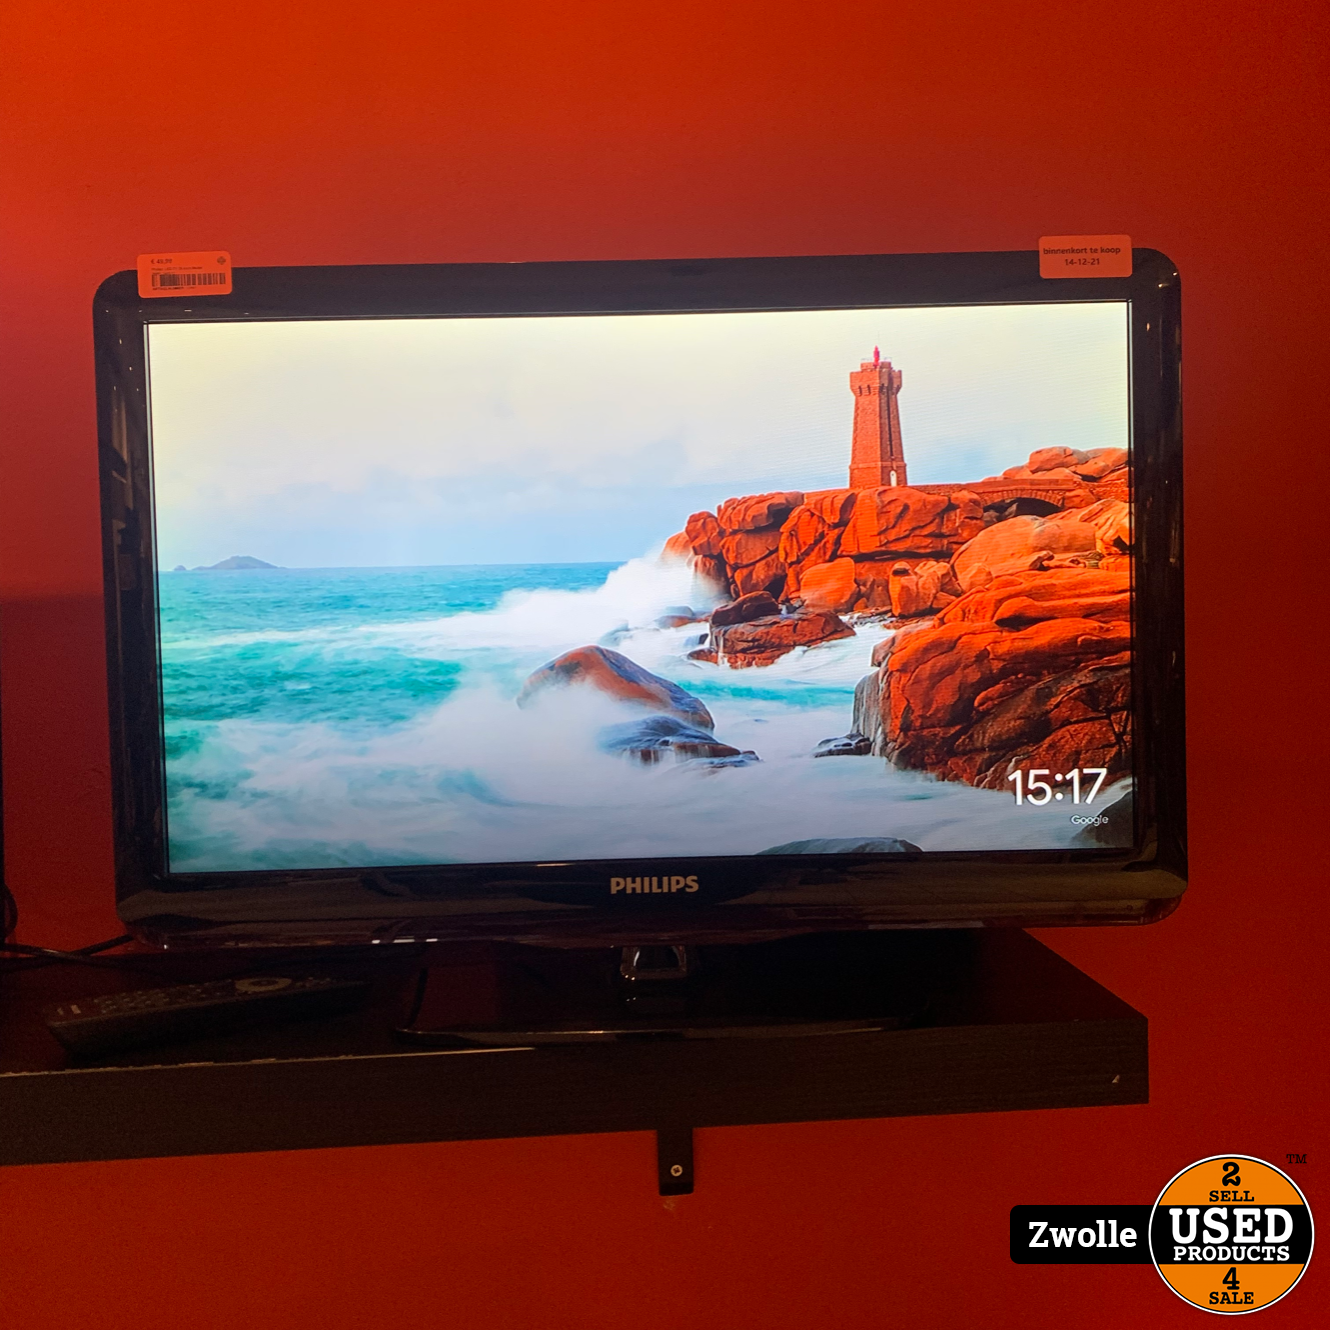 defect wetgeving heilig Philips LED-TV 26 inch Model 26PFL3405/12 - Used Products Zwolle